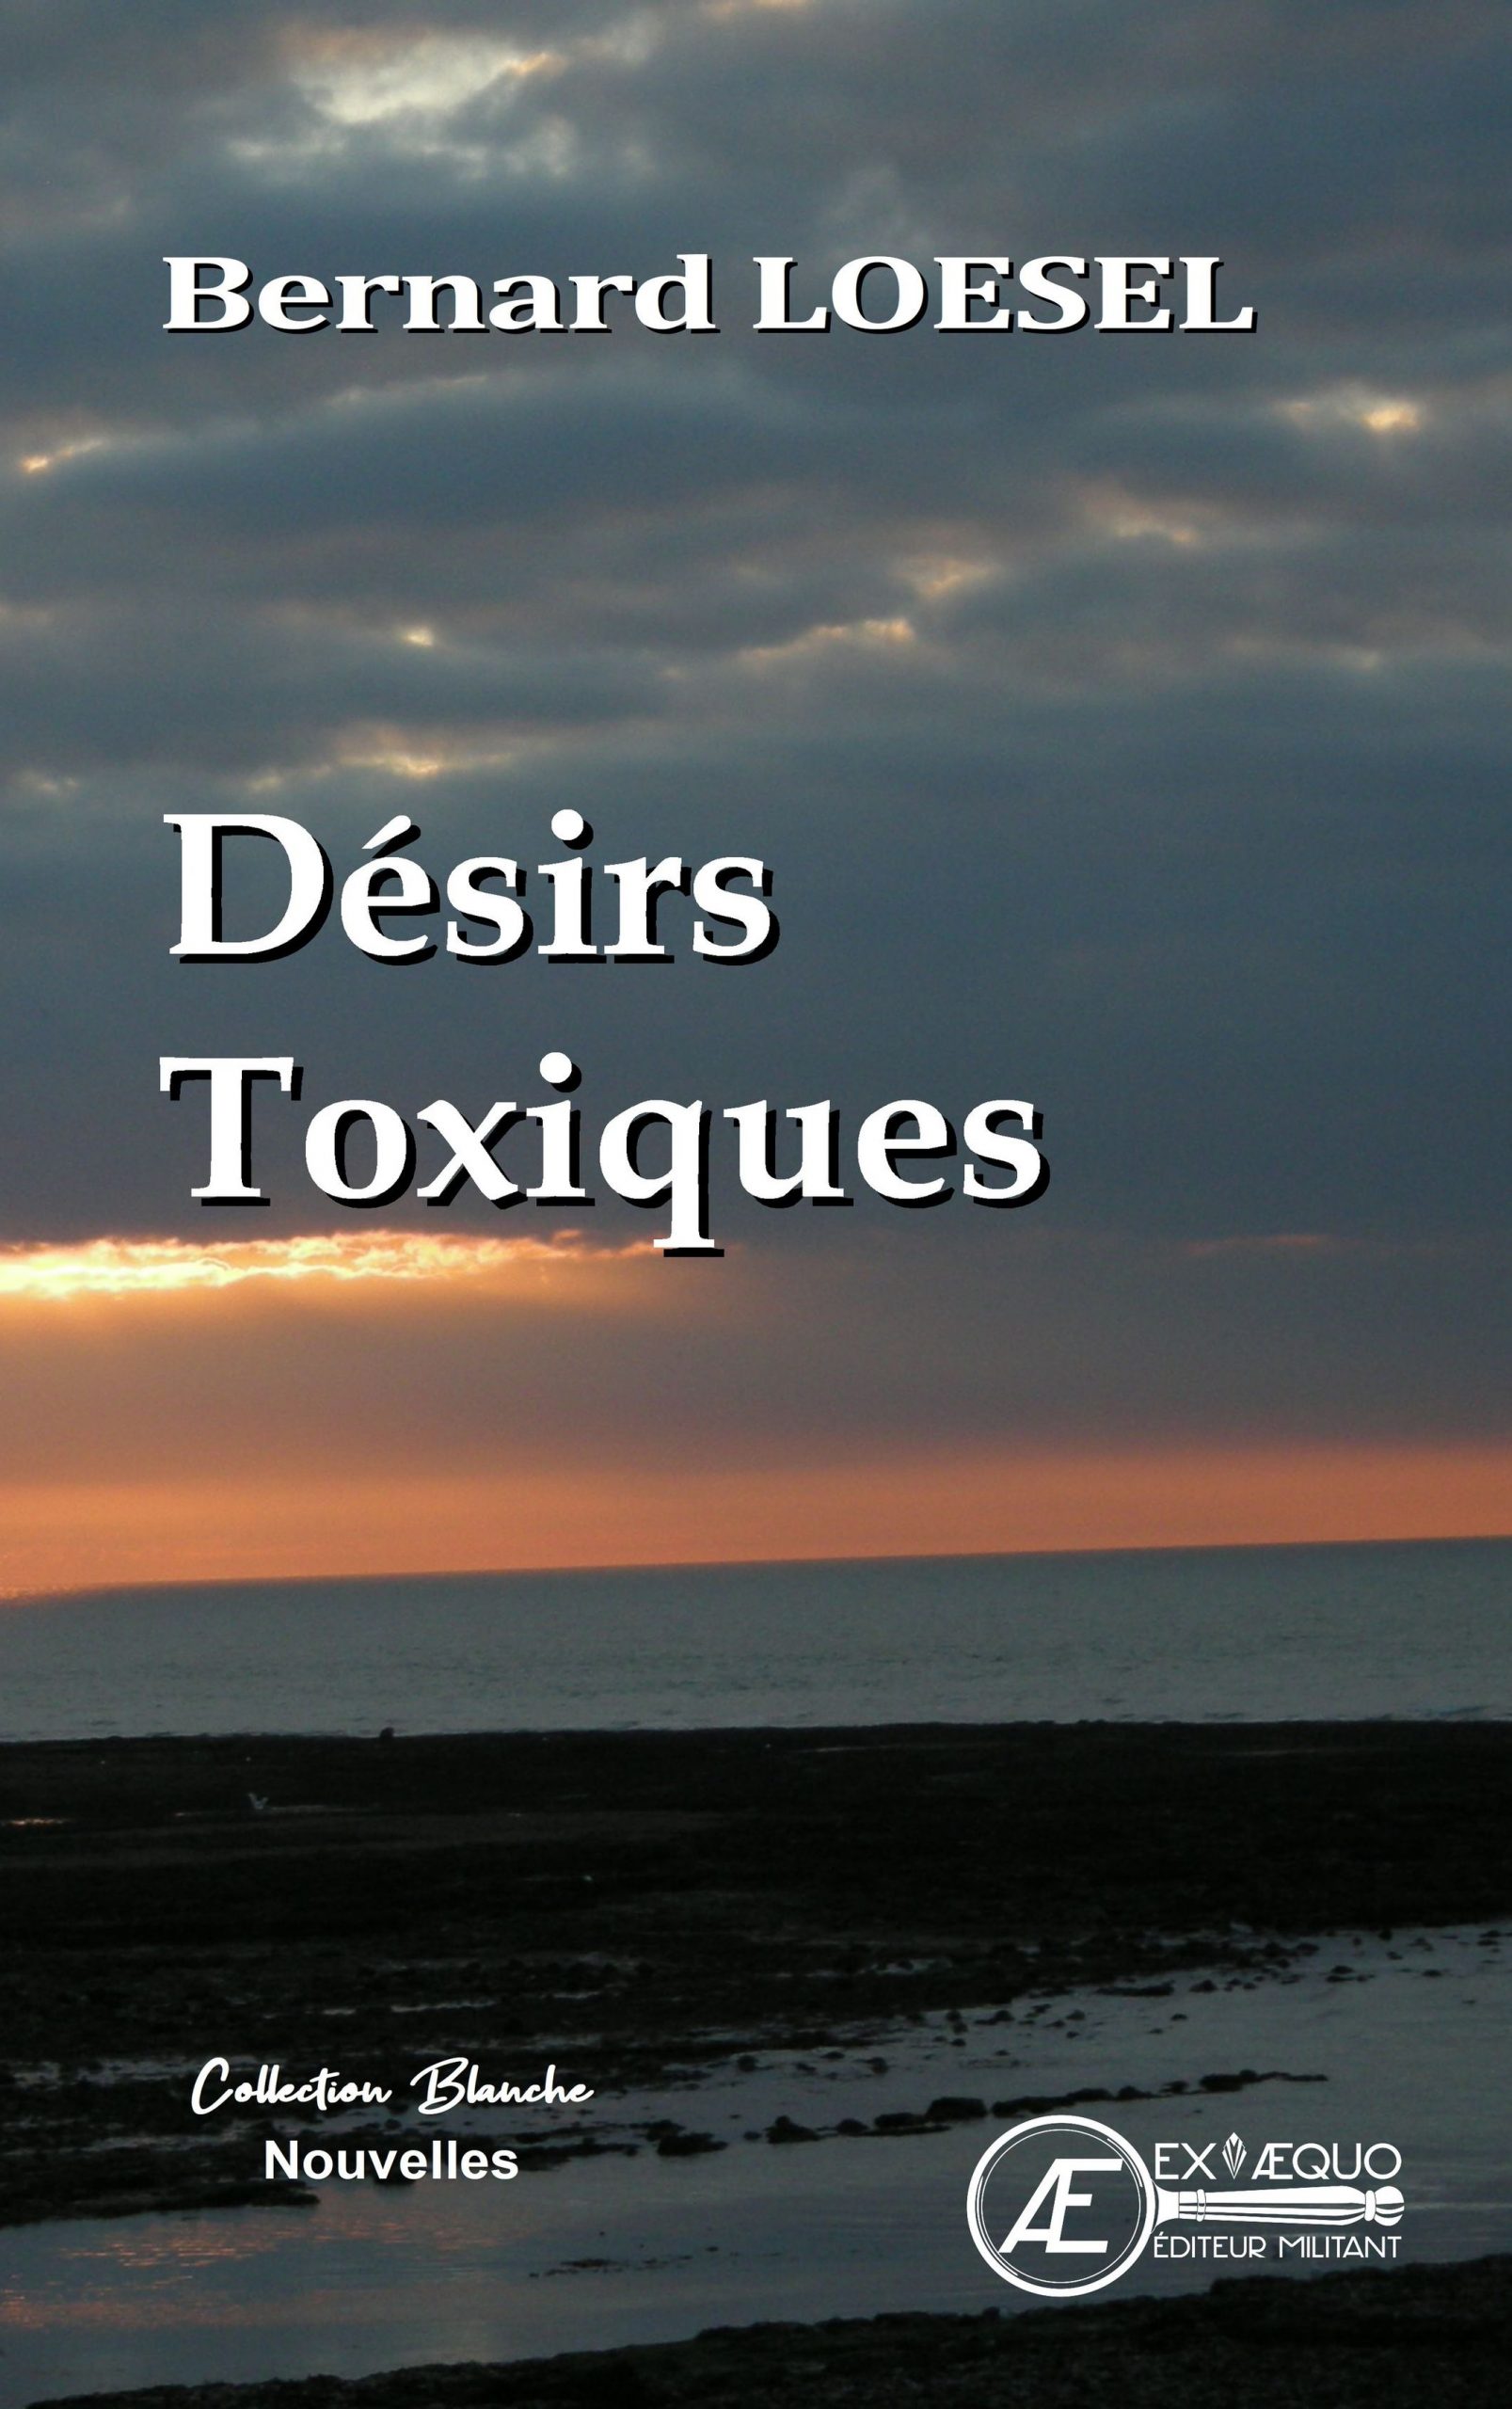 You are currently viewing Désirs Toxiques, de Bernard Loesel